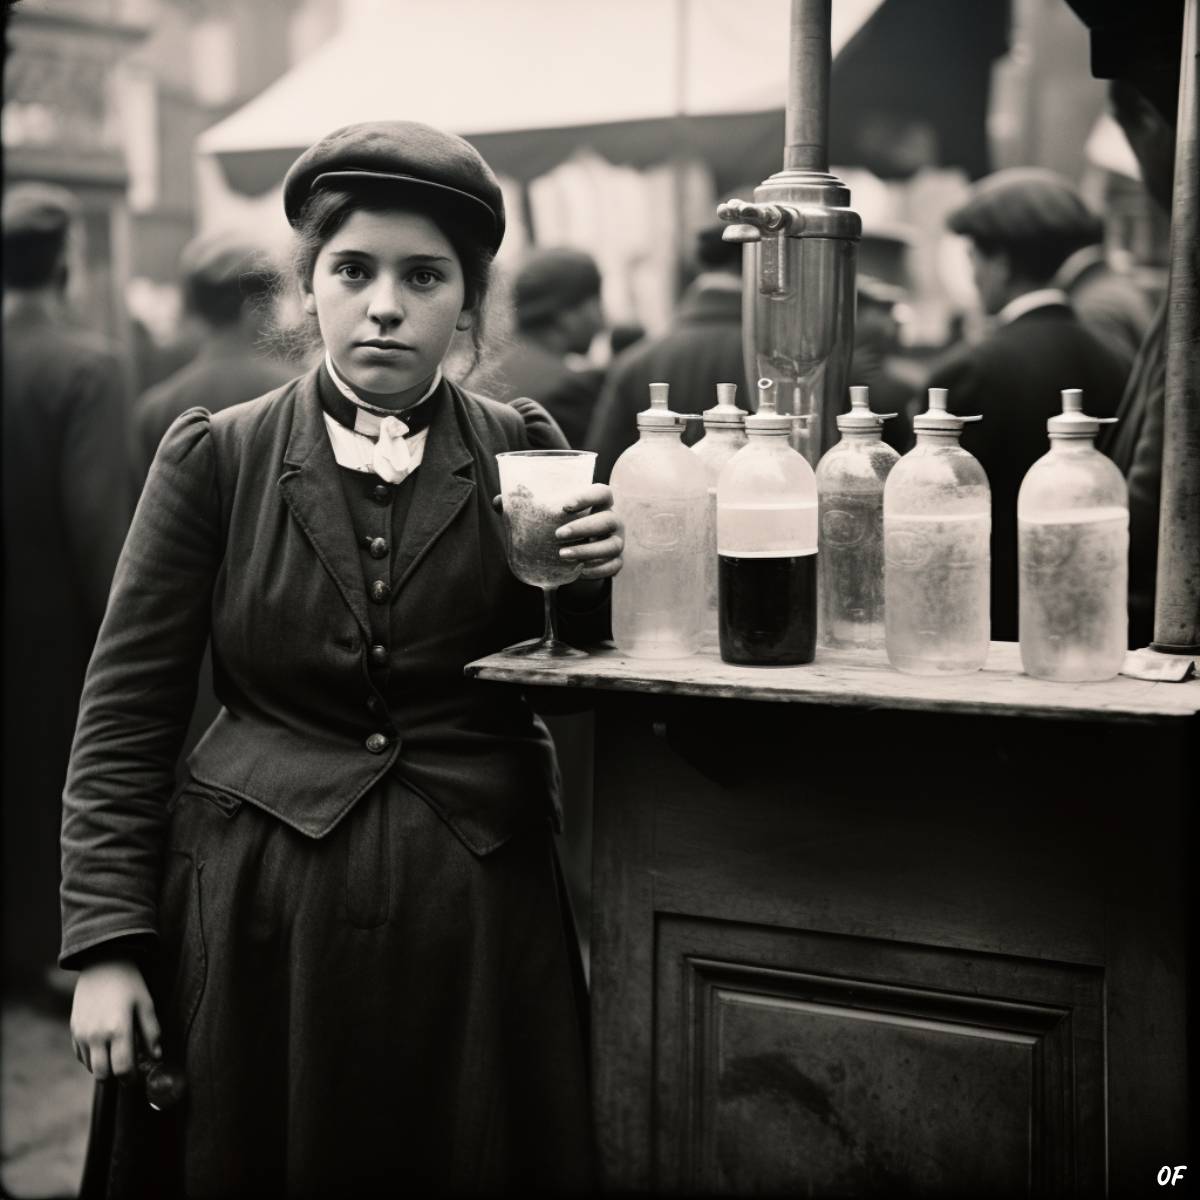 A Victorian circus concession worker selling pink lemonade.